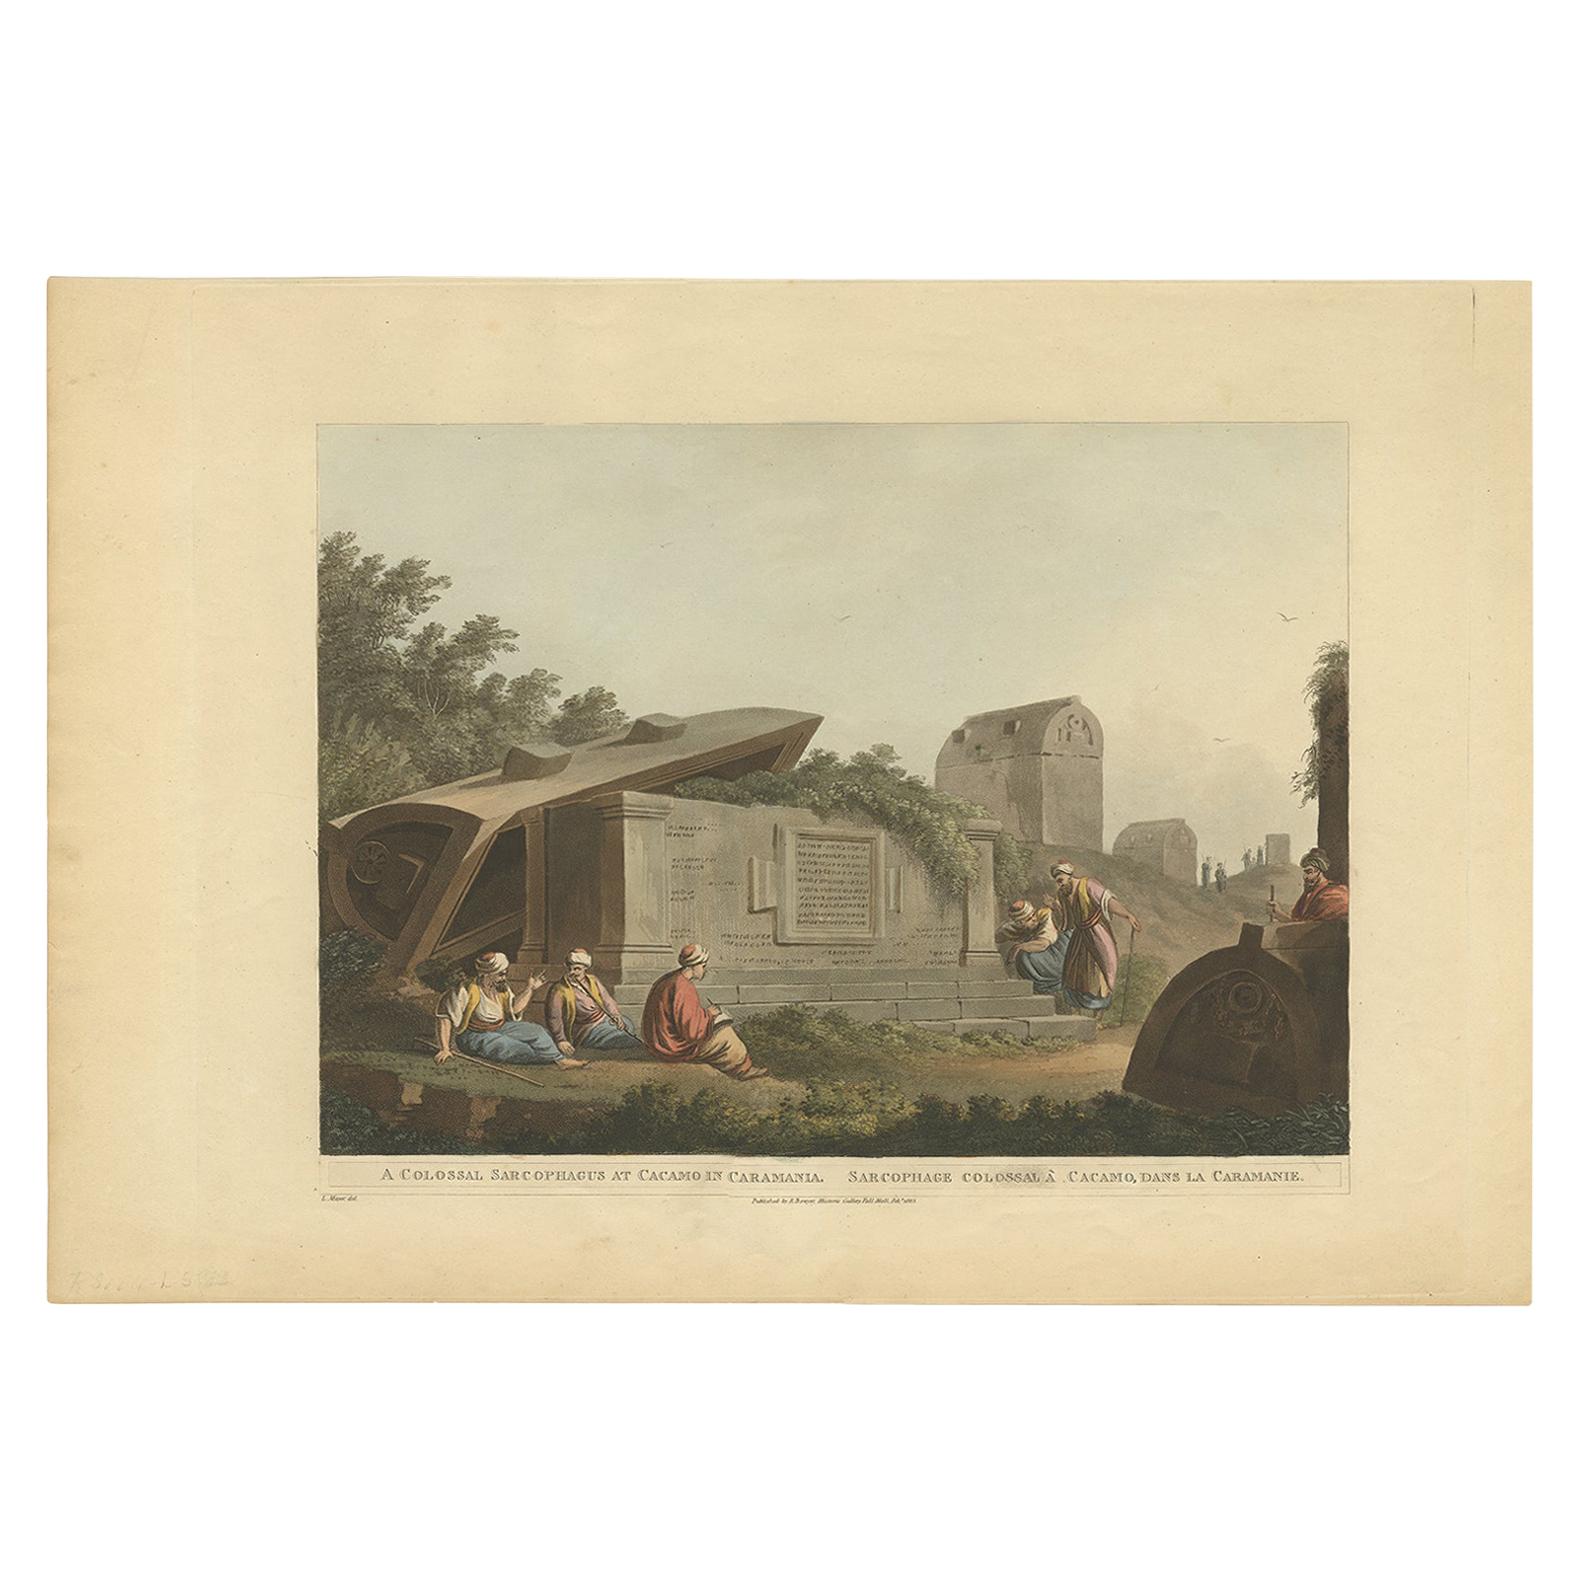 Antique Print of a Sarcophagus at Caccamo by Bowyer, 1803